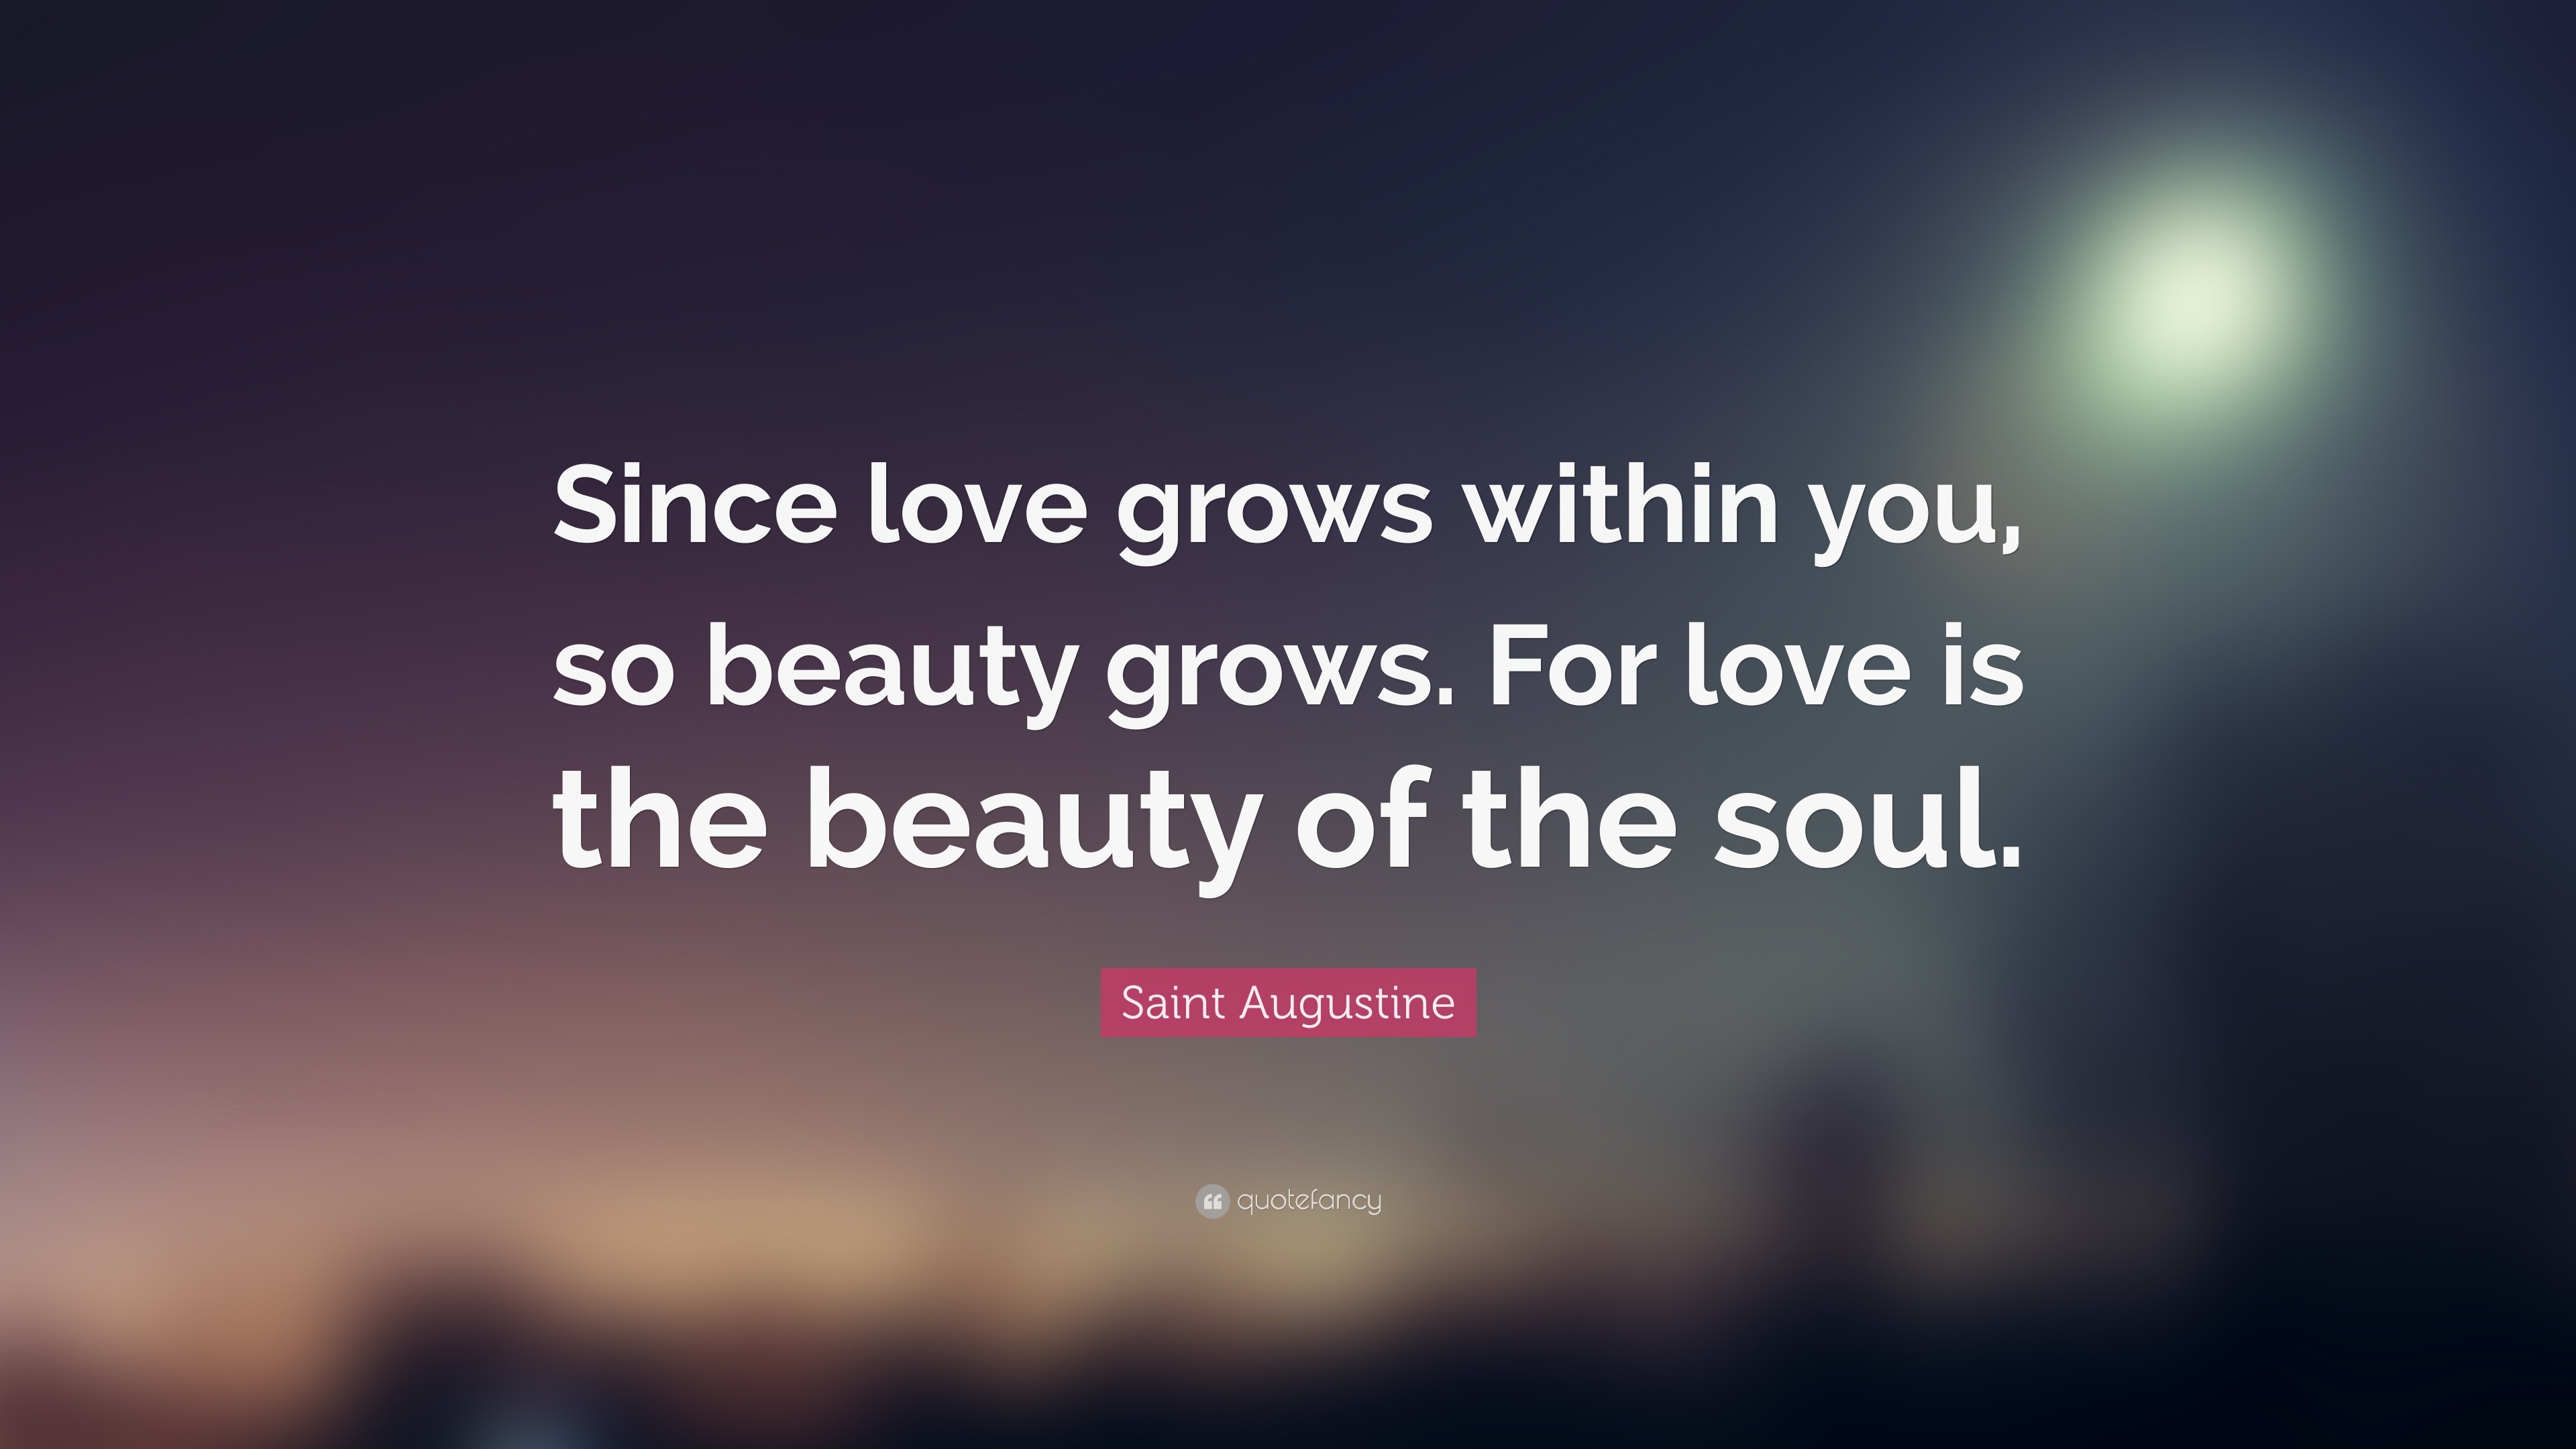 Saint Augustine Quote “Since love grows within you so beauty grows For